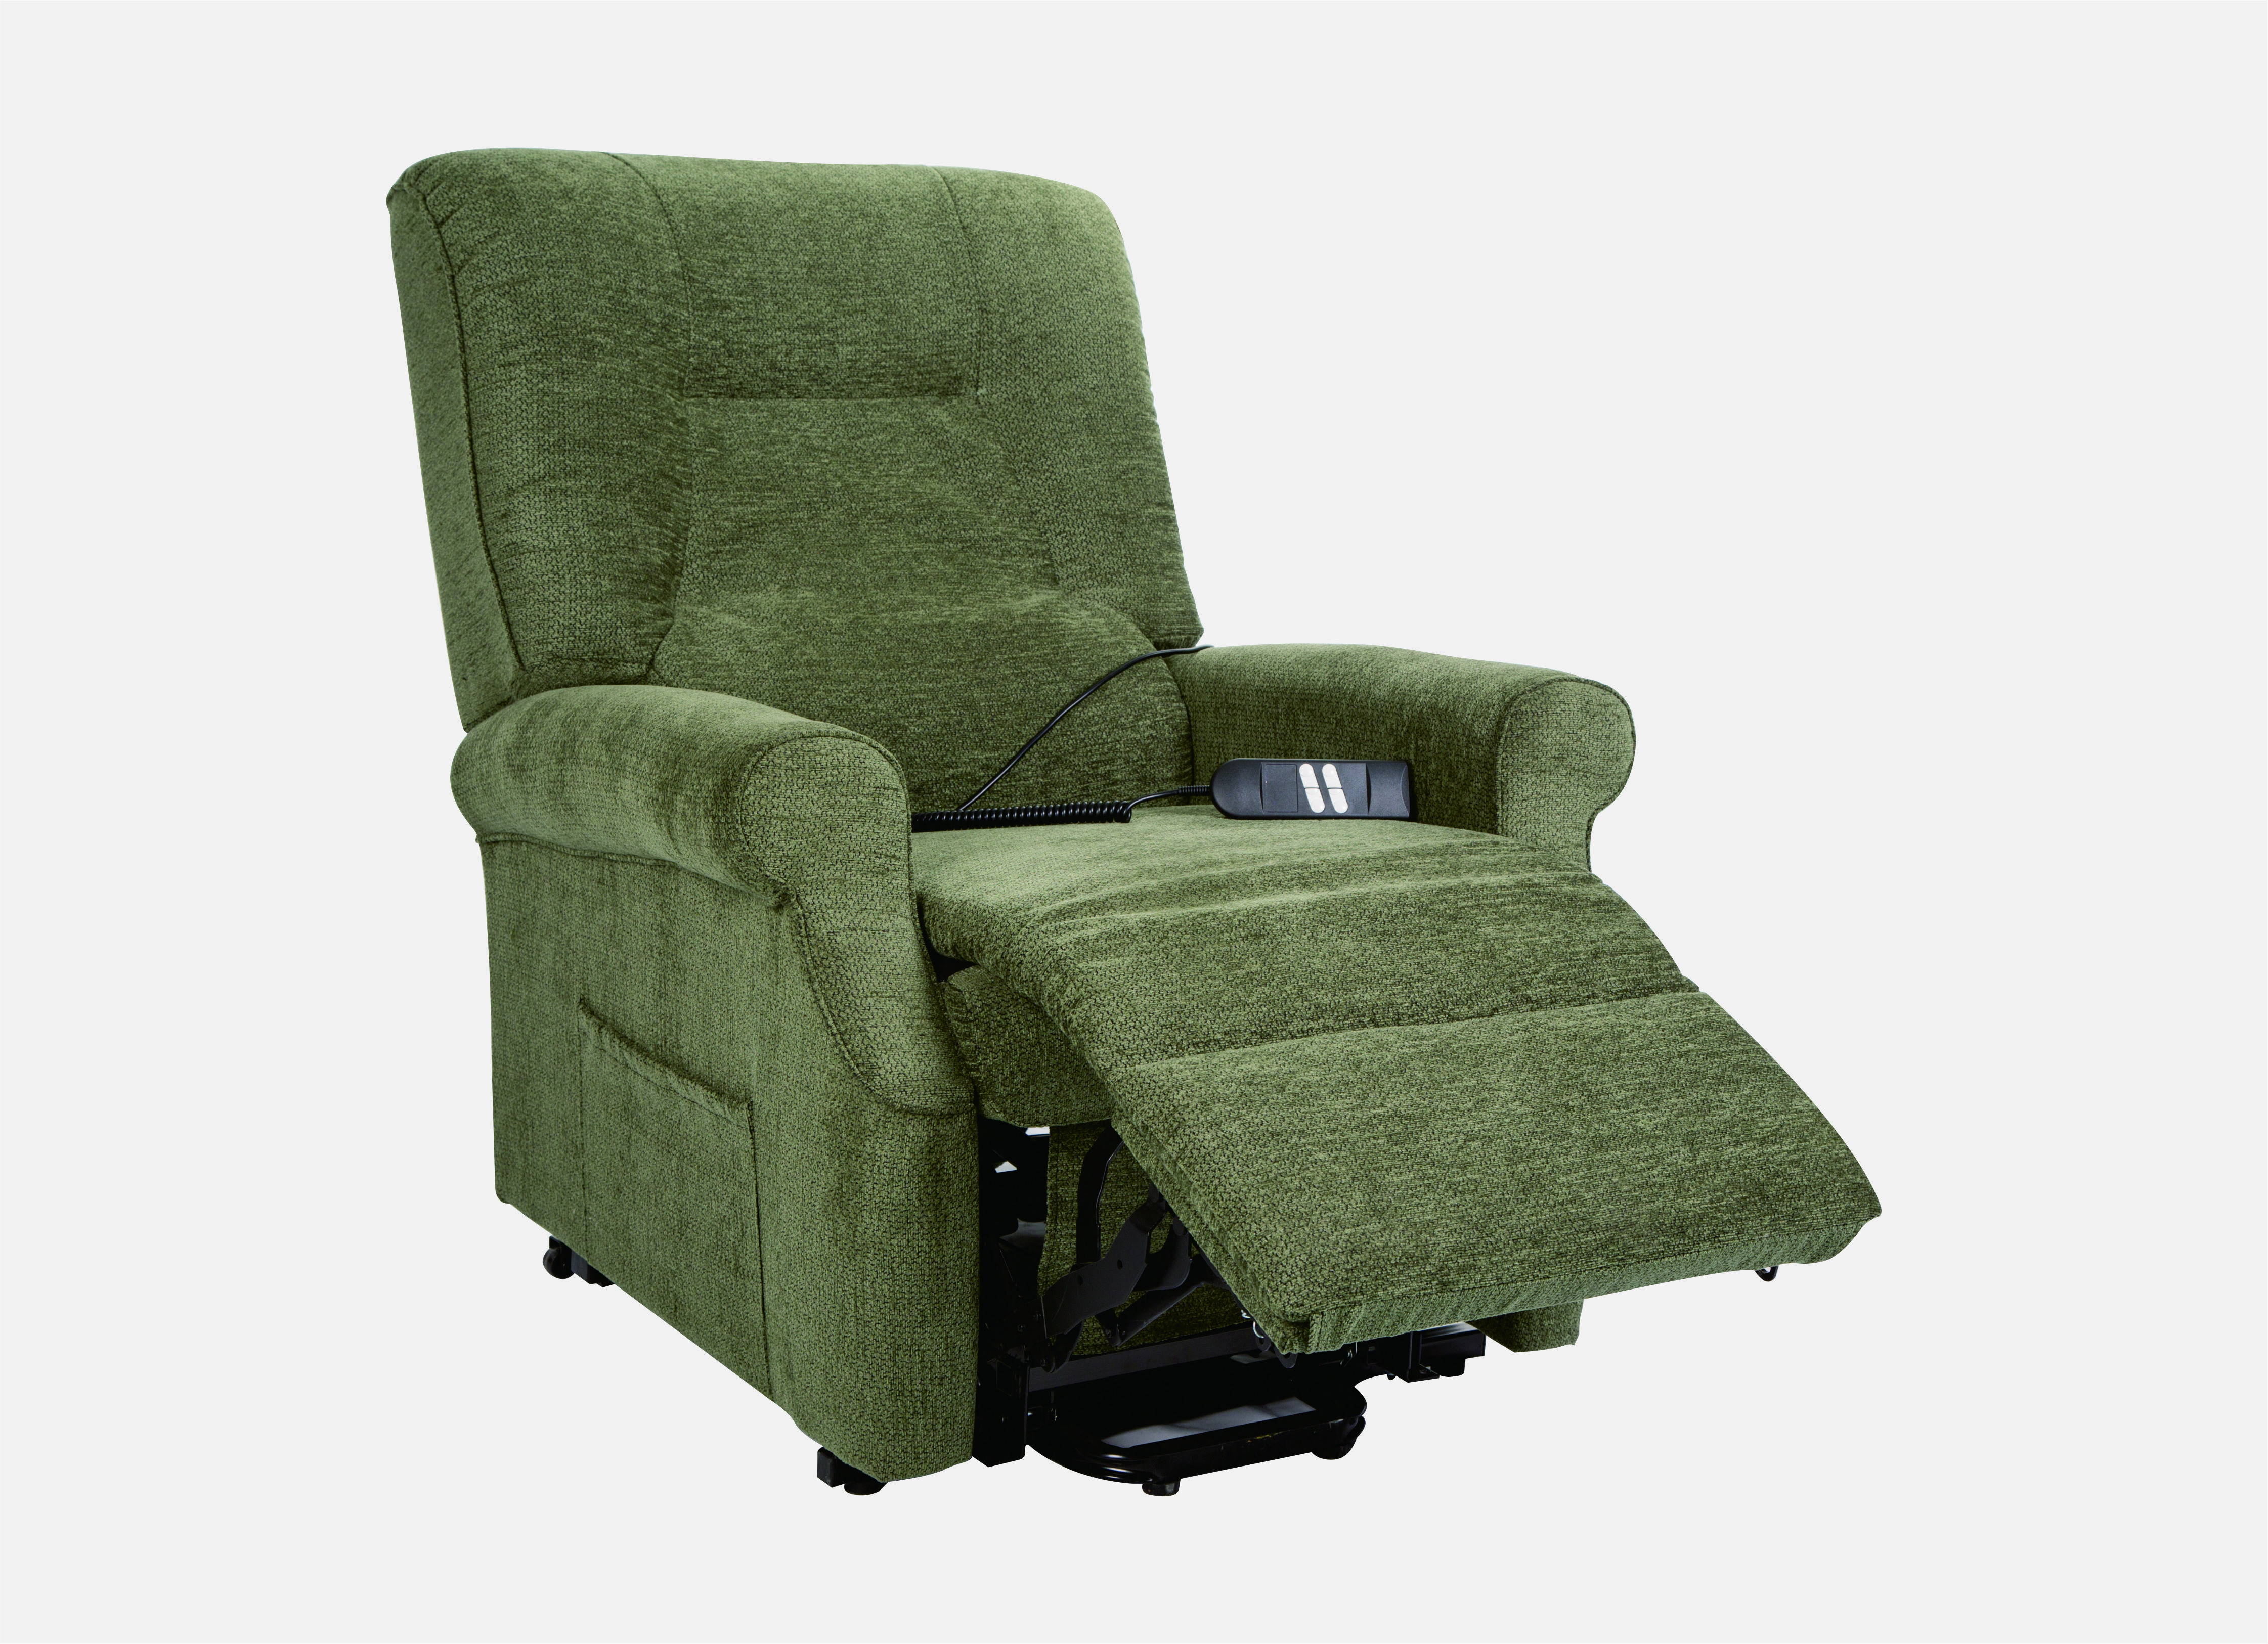 BME 005 Helping Rising up Electric Lift Recliner Massage Chairs Lift Chair